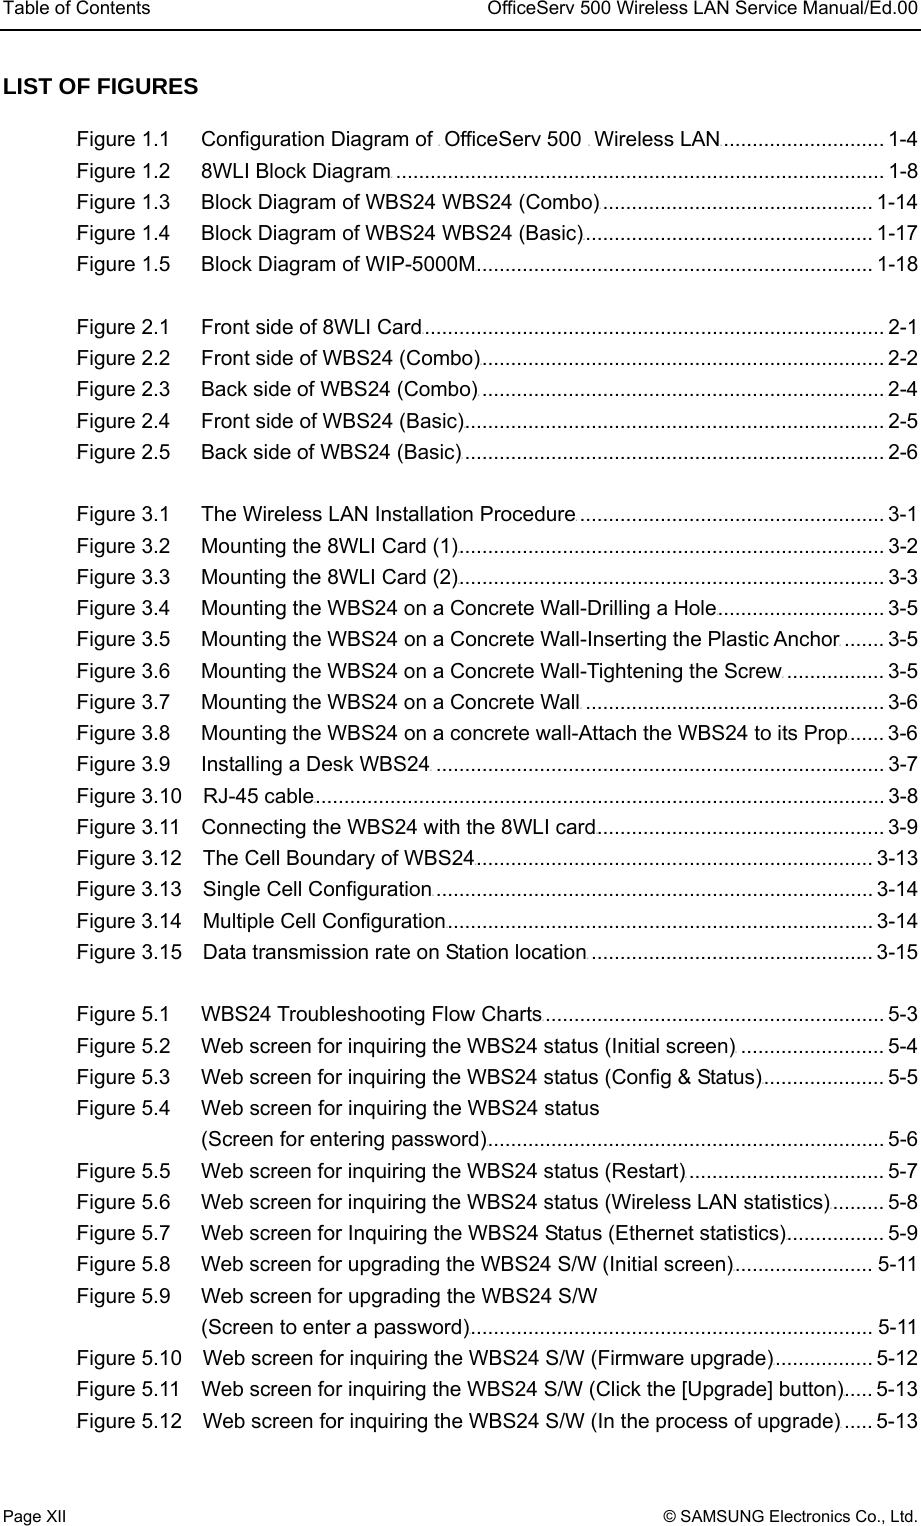 Table of Contents  OfficeServ 500 Wireless LAN Service Manual/Ed.00 Page XII © SAMSUNG Electronics Co., Ltd. LIST OF FIGURES UFigure 1.1      Configuration Diagram of U OfficeServ 500 U Wireless LANU............................ 1-4 UFigure 1.2   8WLI Block DiagramU..................................................................................... 1-8 UFigure 1.3      Block Diagram of WBS24 WBS24 (Combo)U............................................... 1-14 UFigure 1.4      Block Diagram of WBS24 WBS24 (Basic)U.................................................. 1-17 UFigure 1.5      Block Diagram of WIP-5000MU..................................................................... 1-18  UFigure 2.1      Front side of 8WLI CardU................................................................................ 2-1 UFigure 2.2      Front side of WBS24 (Combo)U...................................................................... 2-2 UFigure 2.3      Back side of WBS24 (Combo)U...................................................................... 2-4 UFigure 2.4      Front side of WBS24 (Basic)U......................................................................... 2-5 UFigure 2.5      Back side of WBS24 (Basic)U......................................................................... 2-6  UFigure 3.1      The Wireless LAN Installation ProcedureU..................................................... 3-1 UFigure 3.2      Mounting the 8WLI Card (1)U.......................................................................... 3-2 UFigure 3.3      Mounting the 8WLI Card (2)U.......................................................................... 3-3 UFigure 3.4      Mounting the WBS24 on a Concrete Wall-Drilling a HoleU............................. 3-5 UFigure 3.5      Mounting the WBS24 on a Concrete Wall-Inserting the Plastic AnchorU....... 3-5 UFigure 3.6      Mounting the WBS24 on a Concrete Wall-Tightening the ScrewU................. 3-5 UFigure 3.7      Mounting the WBS24 on a Concrete WallU.................................................... 3-6 UFigure 3.8      Mounting the WBS24 on a concrete wall-Attach the WBS24 to its PropU...... 3-6 UFigure 3.9      Installing a Desk WBS24U.............................................................................. 3-7 UFigure 3.10  RJ-45 cableU................................................................................................... 3-8 UFigure 3.11    Connecting the WBS24 with the 8WLI cardU.................................................. 3-9 UFigure 3.12    The Cell Boundary of WBS24U..................................................................... 3-13 UFigure 3.13    Single Cell ConfigurationU............................................................................ 3-14 UFigure 3.14    Multiple Cell ConfigurationU.......................................................................... 3-14 UFigure 3.15    Data transmission rate on Station locationU................................................. 3-15  UFigure 5.1      WBS24 Troubleshooting Flow ChartsU........................................................... 5-3 UFigure 5.2      Web screen for inquiring the WBS24 status (Initial screen)U......................... 5-4 UFigure 5.3      Web screen for inquiring the WBS24 status (Config &amp; Status)U..................... 5-5 UFigure 5.4      Web screen for inquiring the WBS24 status  (Screen for entering password)U..................................................................... 5-6 UFigure 5.5      Web screen for inquiring the WBS24 status (Restart)U.................................. 5-7 UFigure 5.6      Web screen for inquiring the WBS24 status (Wireless LAN statistics)U......... 5-8 UFigure 5.7      Web screen for Inquiring the WBS24 Status (Ethernet statistics)U................. 5-9 UFigure 5.8      Web screen for upgrading the WBS24 S/W (Initial screen)U........................ 5-11 UFigure 5.9      Web screen for upgrading the WBS24 S/W  (Screen to enter a password)U...................................................................... 5-11 UFigure 5.10    Web screen for inquiring the WBS24 S/W (Firmware upgrade)U................. 5-12 UFigure 5.11    Web screen for inquiring the WBS24 S/W (Click the [Upgrade] button)U..... 5-13 UFigure 5.12    Web screen for inquiring the WBS24 S/W (In the process of upgrade)U..... 5-13 